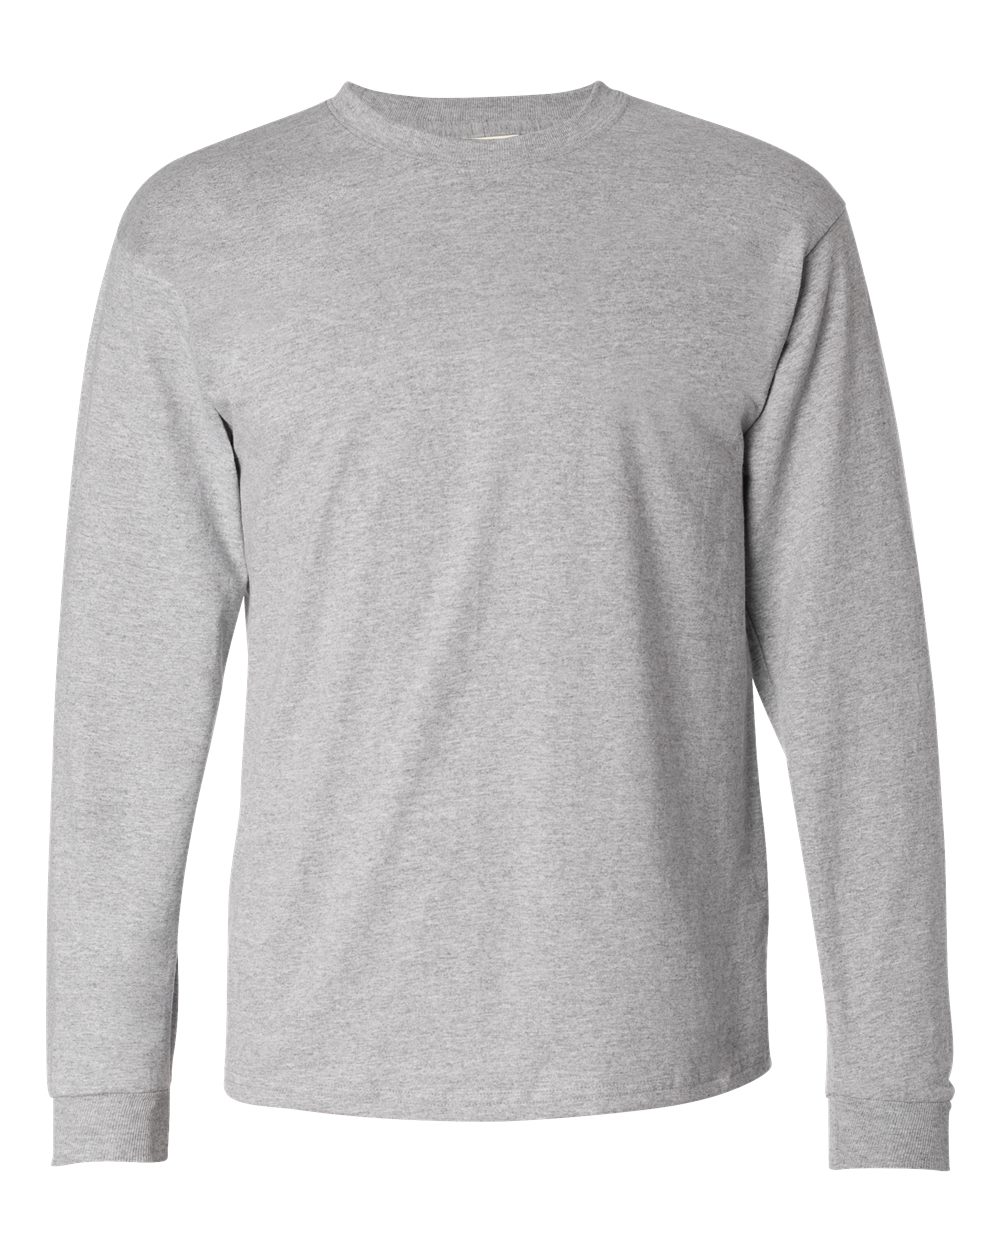 Authentic Long Sleeve Tee for Men Daily Wear | 6 Oz./yd&#xB2;, 100% Cotton Jersey | Embrace Authenticity in Every Detail with Our High-Quality Long Sleeve T-Shirt, a Wardrobe Staple That Speaks Volumes About Comfort, Quality, and Genuine Style | RADYAN&#xAE;